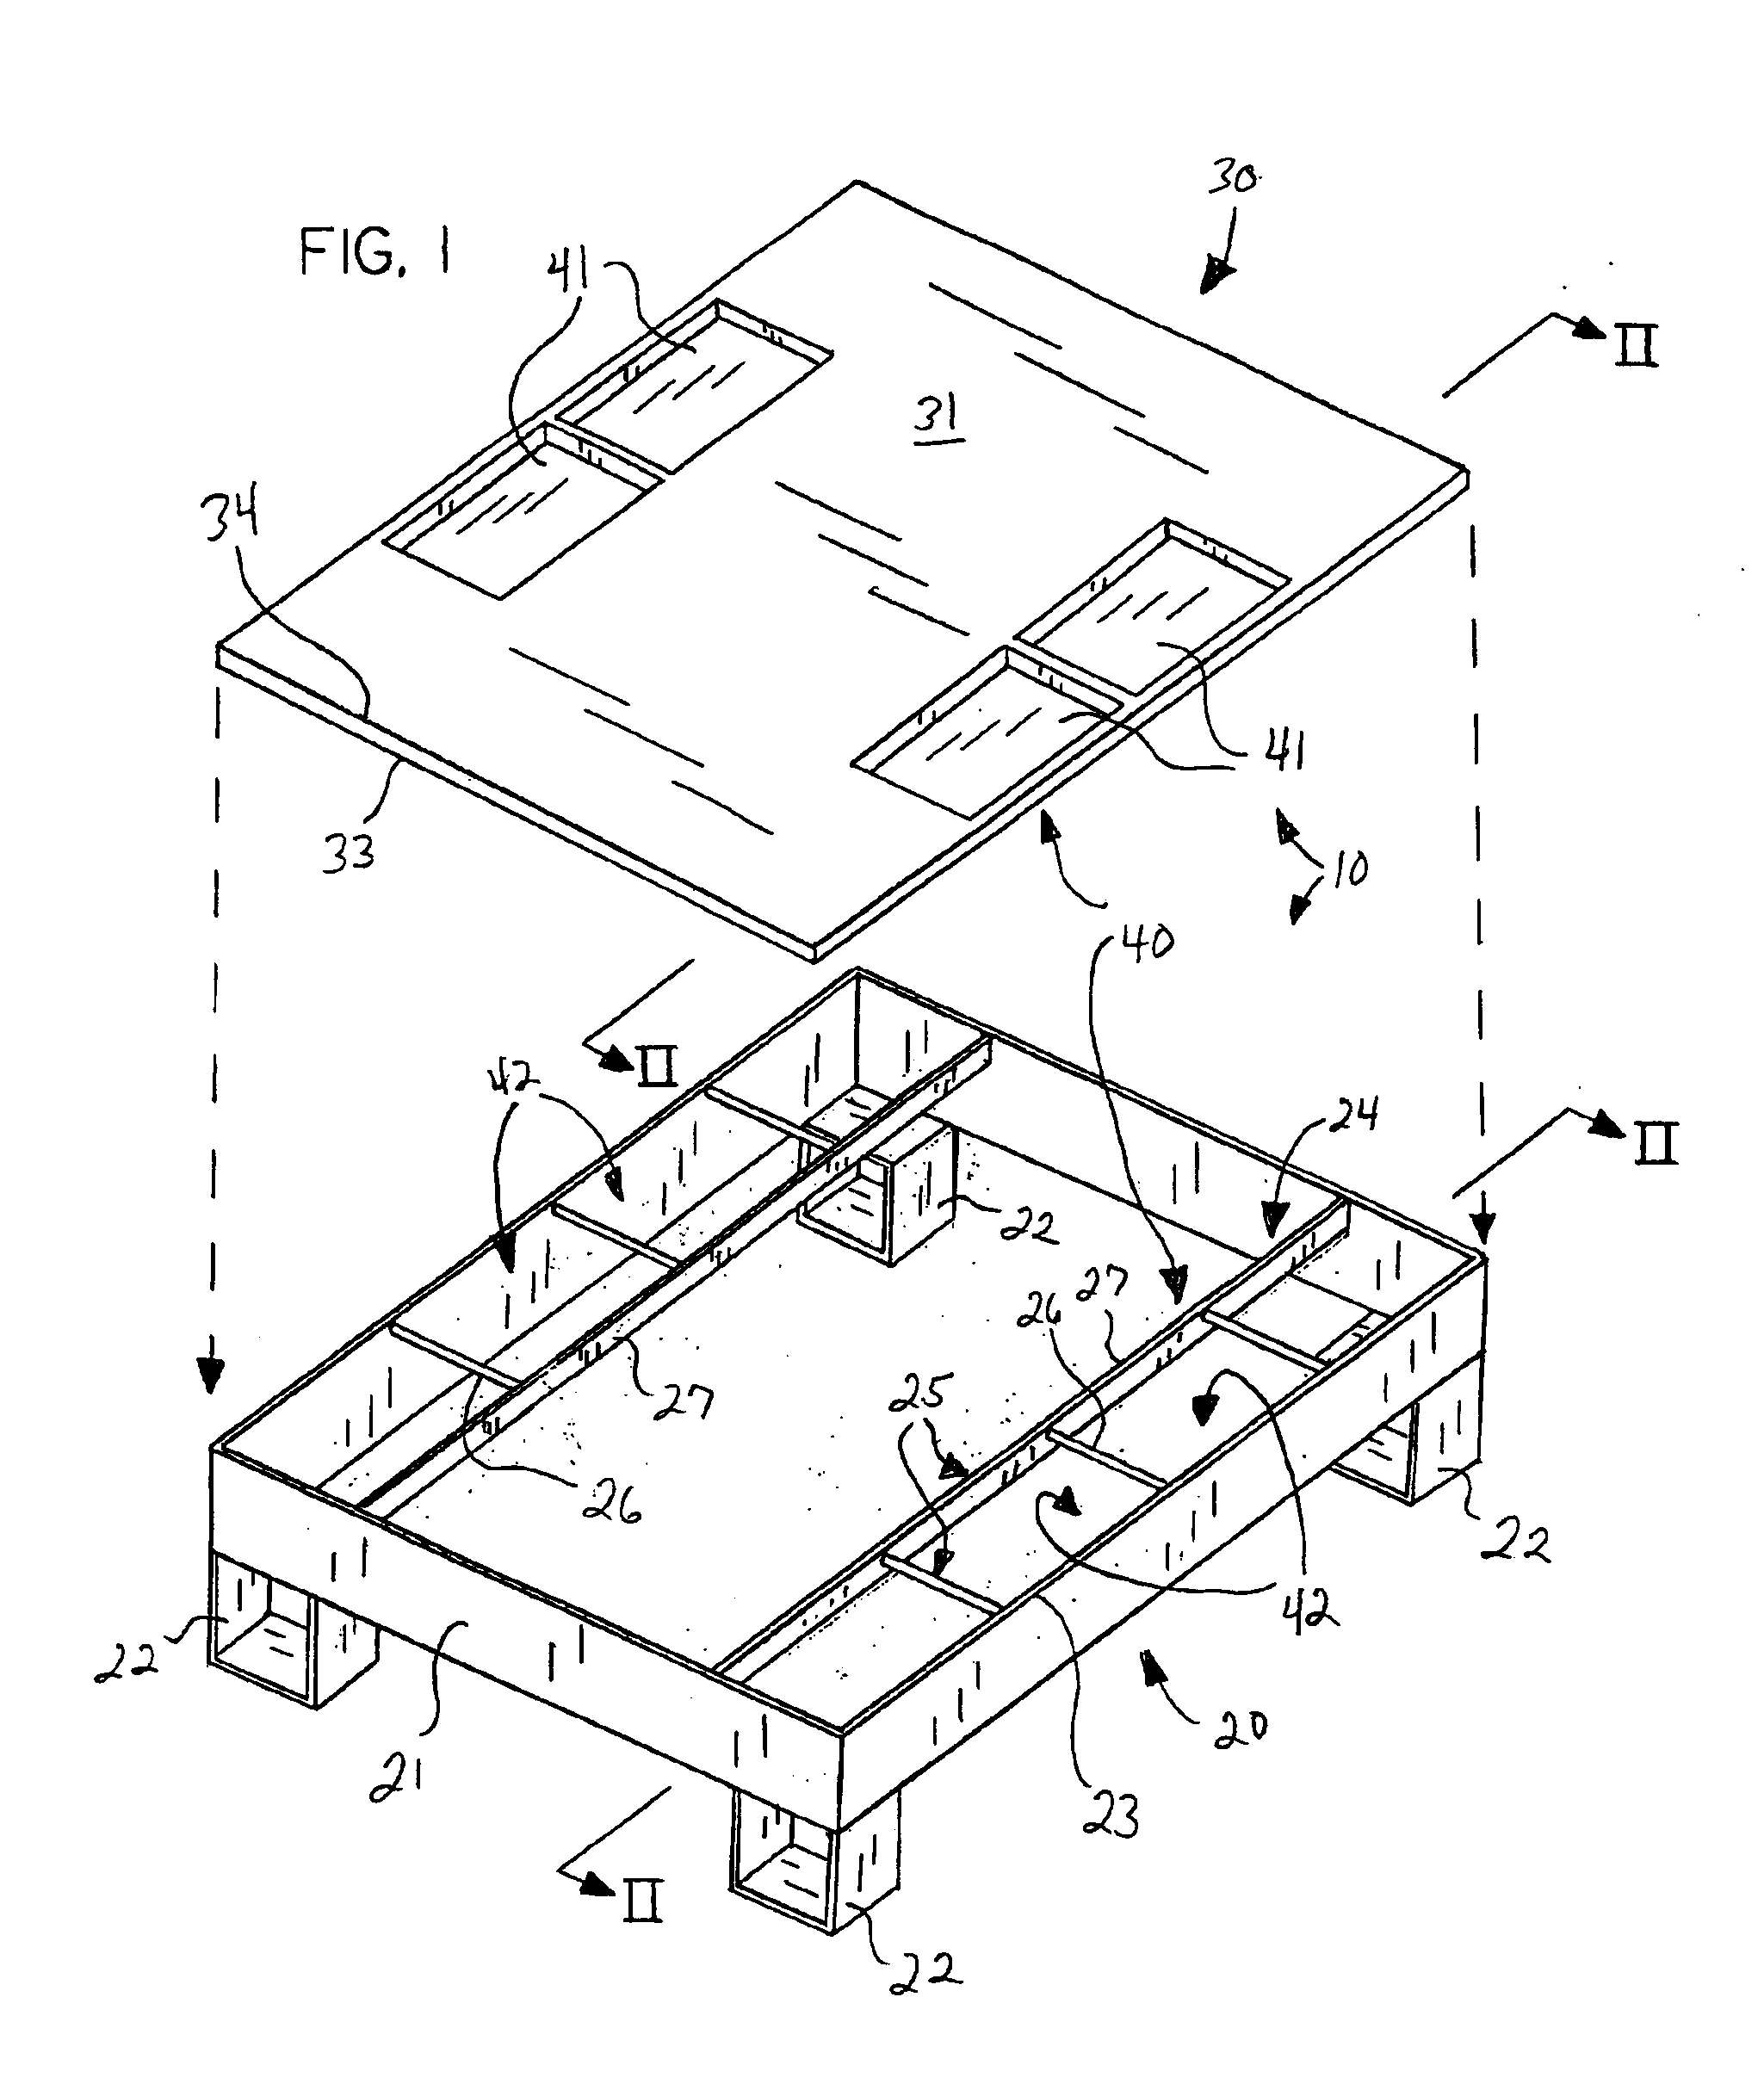 Metal and plastic pallet assembly